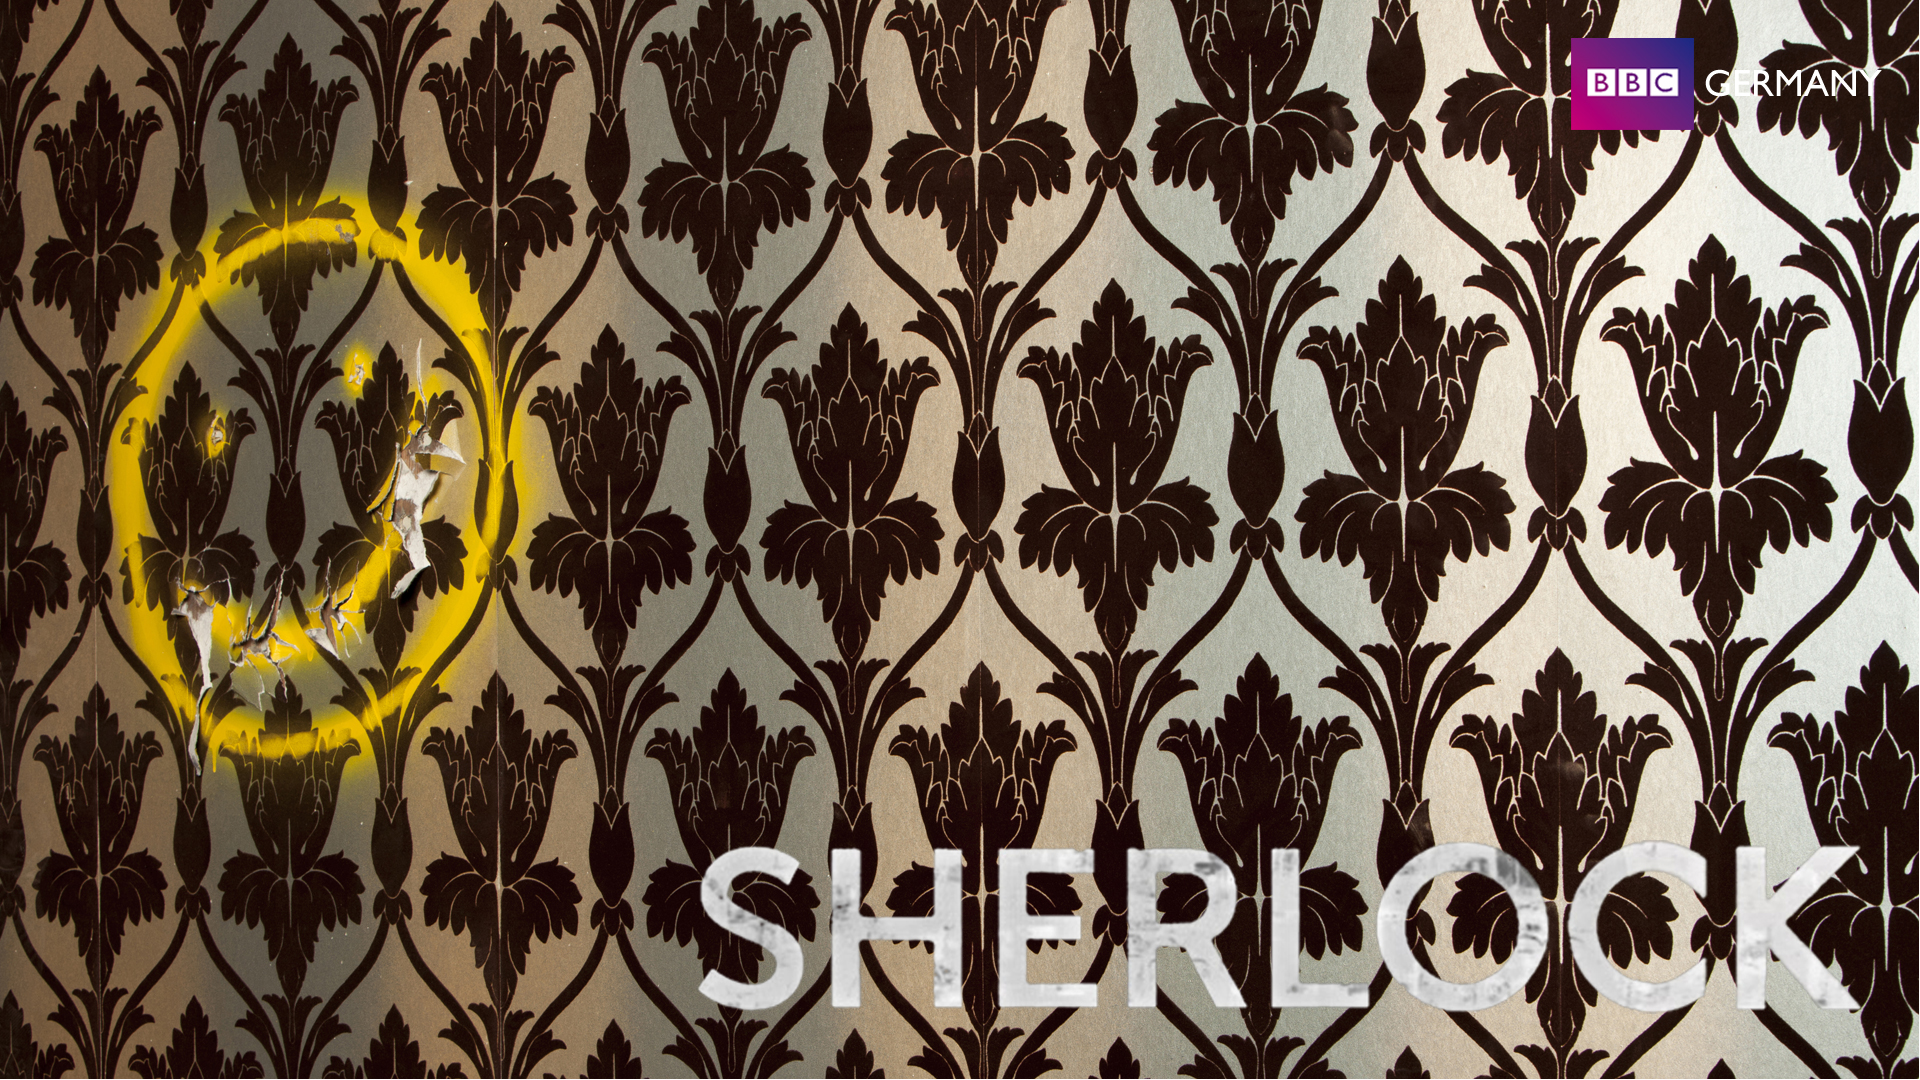 Sherlock Bbc Germany With Resolutions Pixel